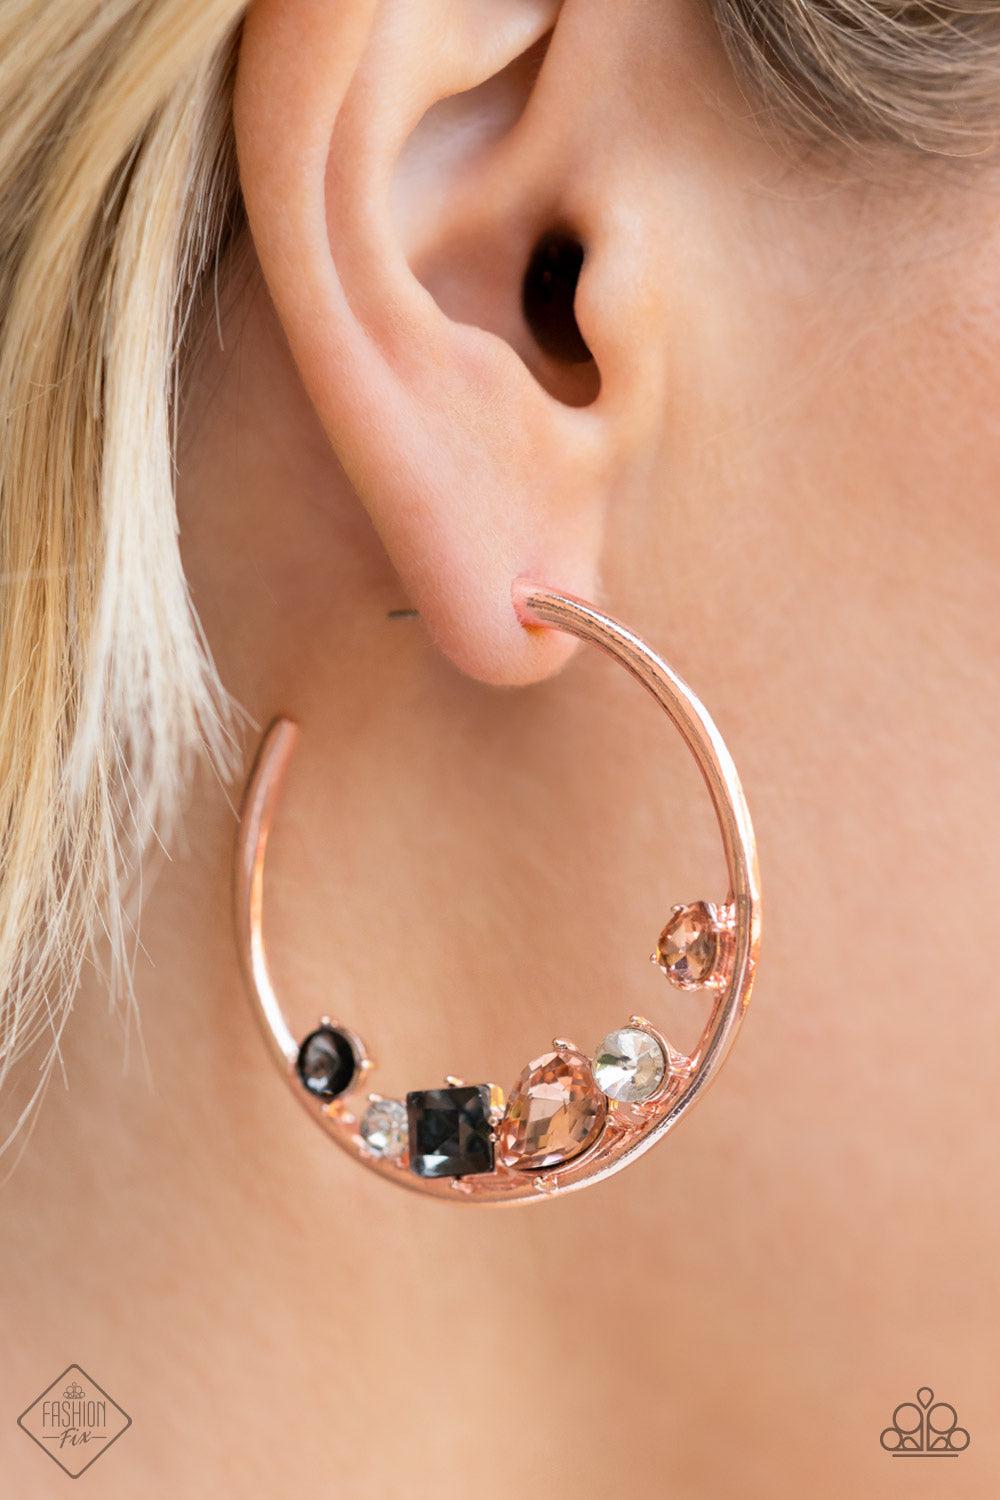 Glimpses of Malibu - 4 Piece Rose Gold Trend Blend Jewelry Set - Paparazzi Accessories - Includes one of each accessory in the Glimpses of Malibu Trend Blend in April's Fashion Fix: Completely Captivated Necklace, Attractive Allure Earrings, Colorful Captivation Bracelet, Law of Attraction Fashion Ring. Featuring playful styles accented with fun pops of color, the Glimpses of Malibu Collection is an endearing assortment of cheerful and whimsical laid-back fashion.